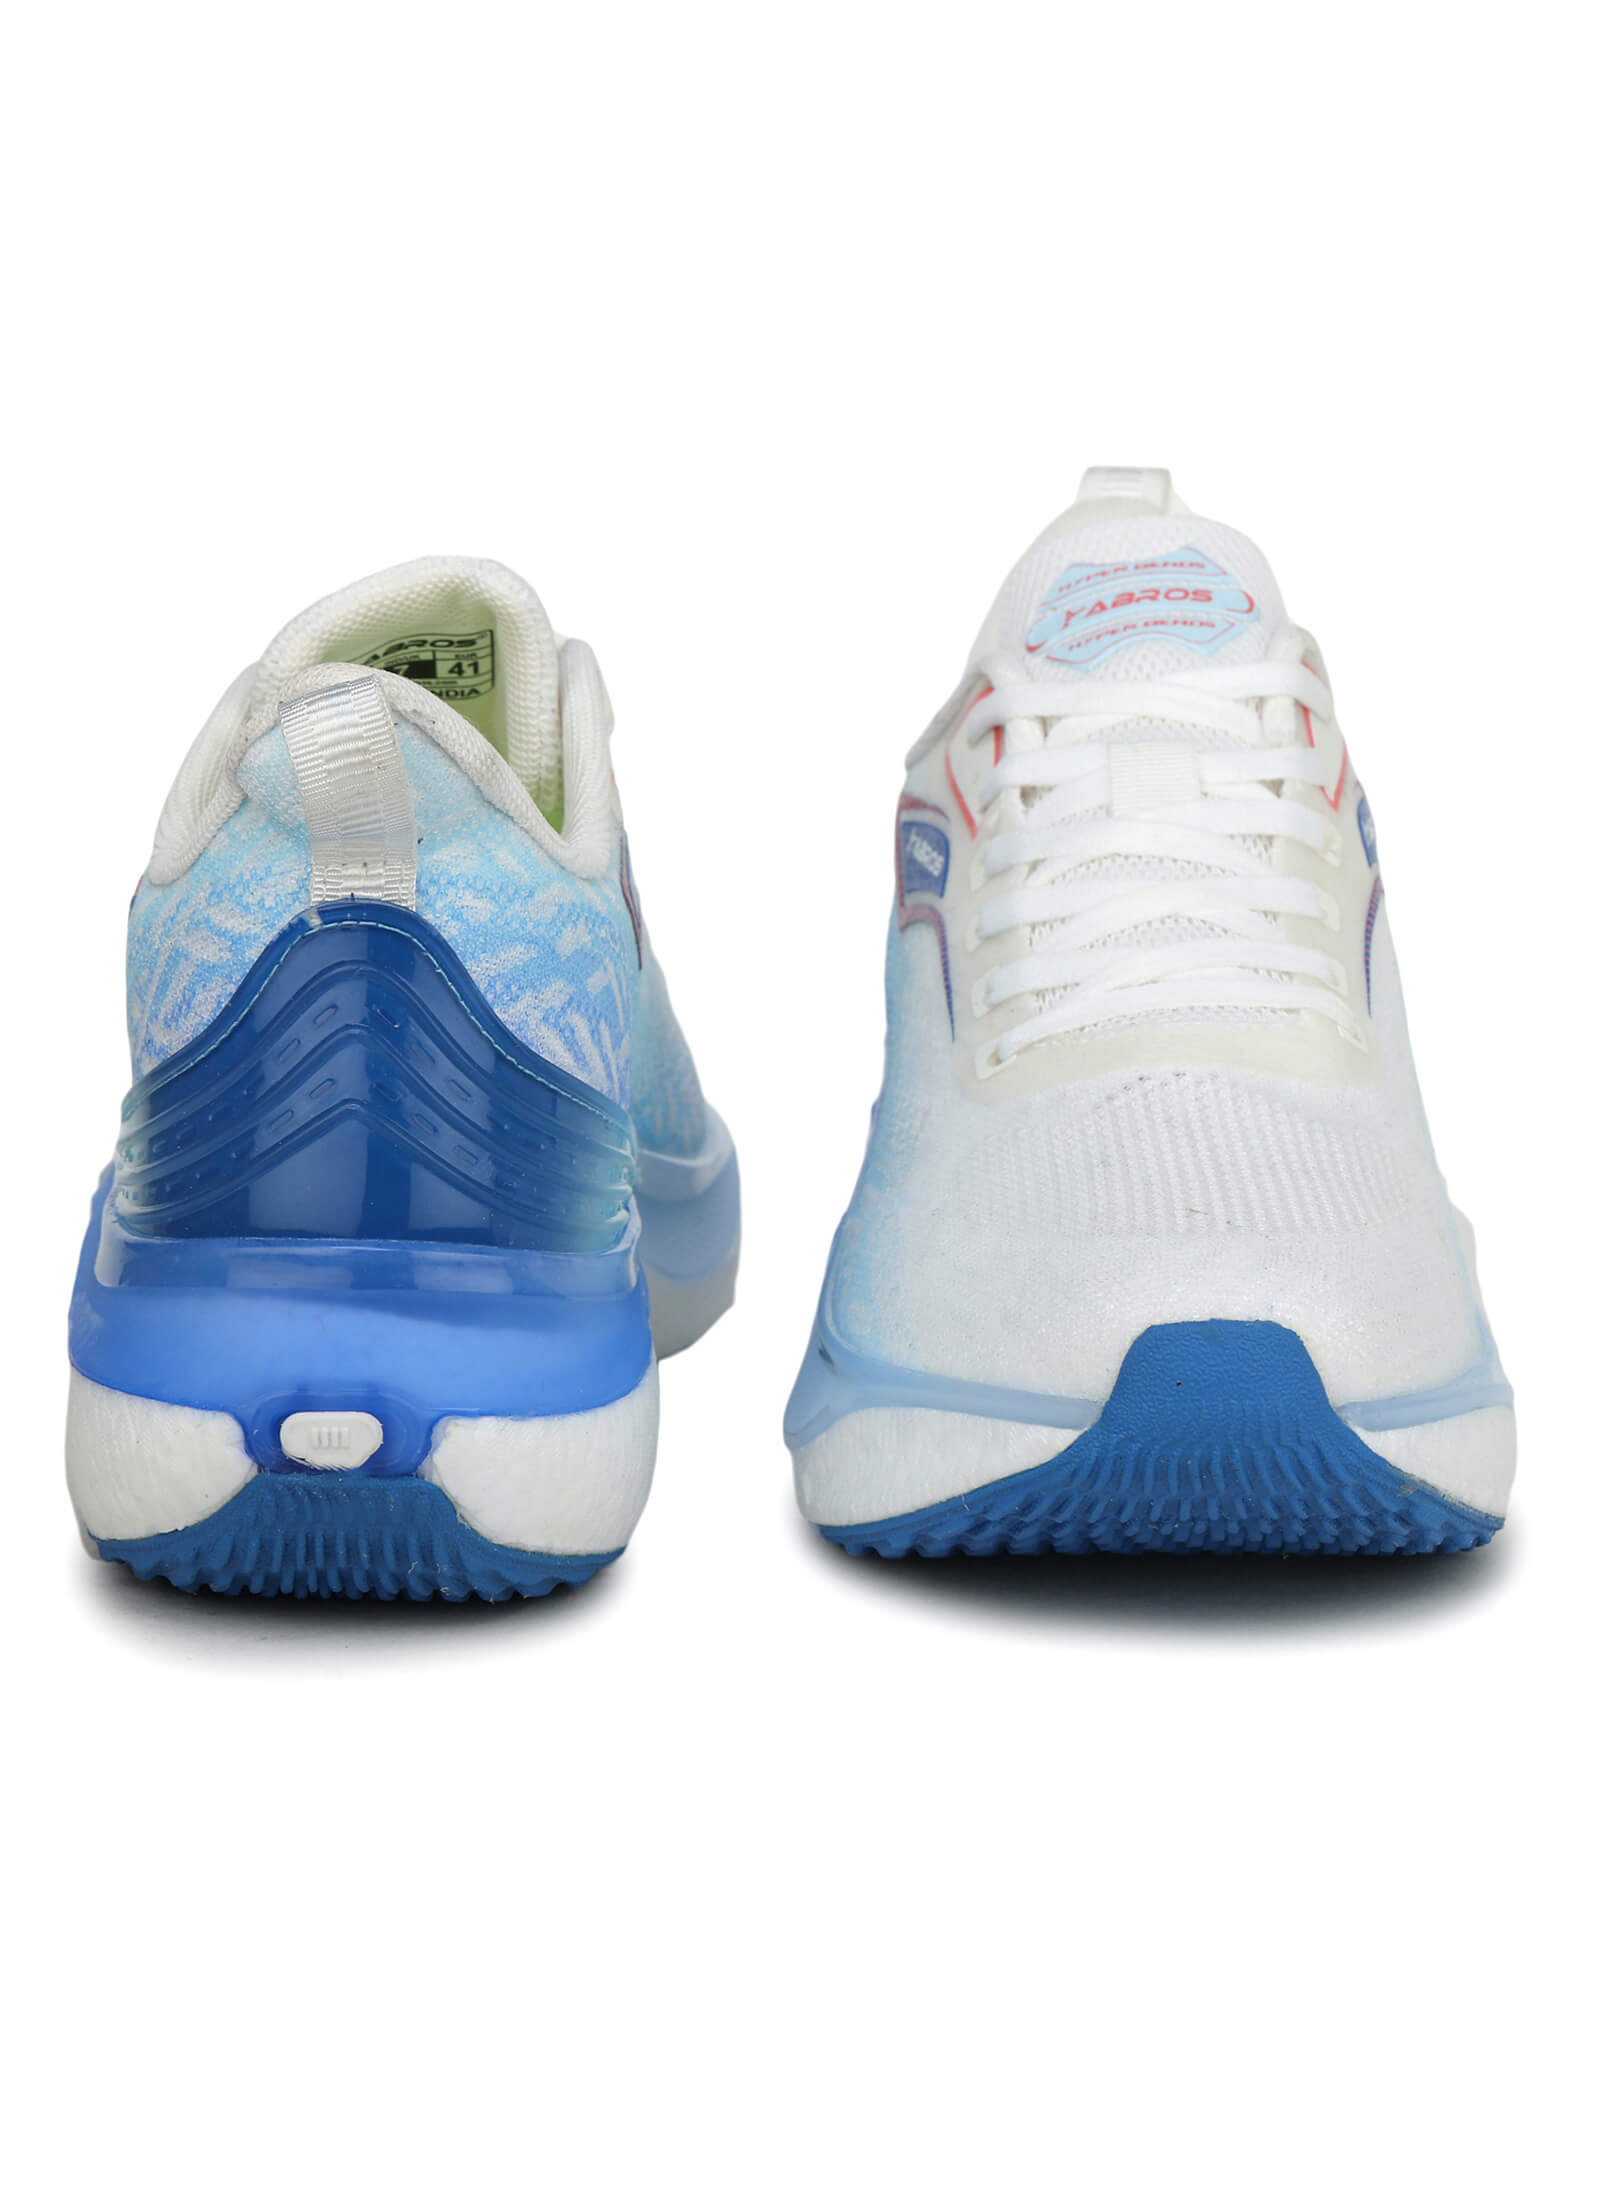 Future Hyper Beads Sports Shoes for Men